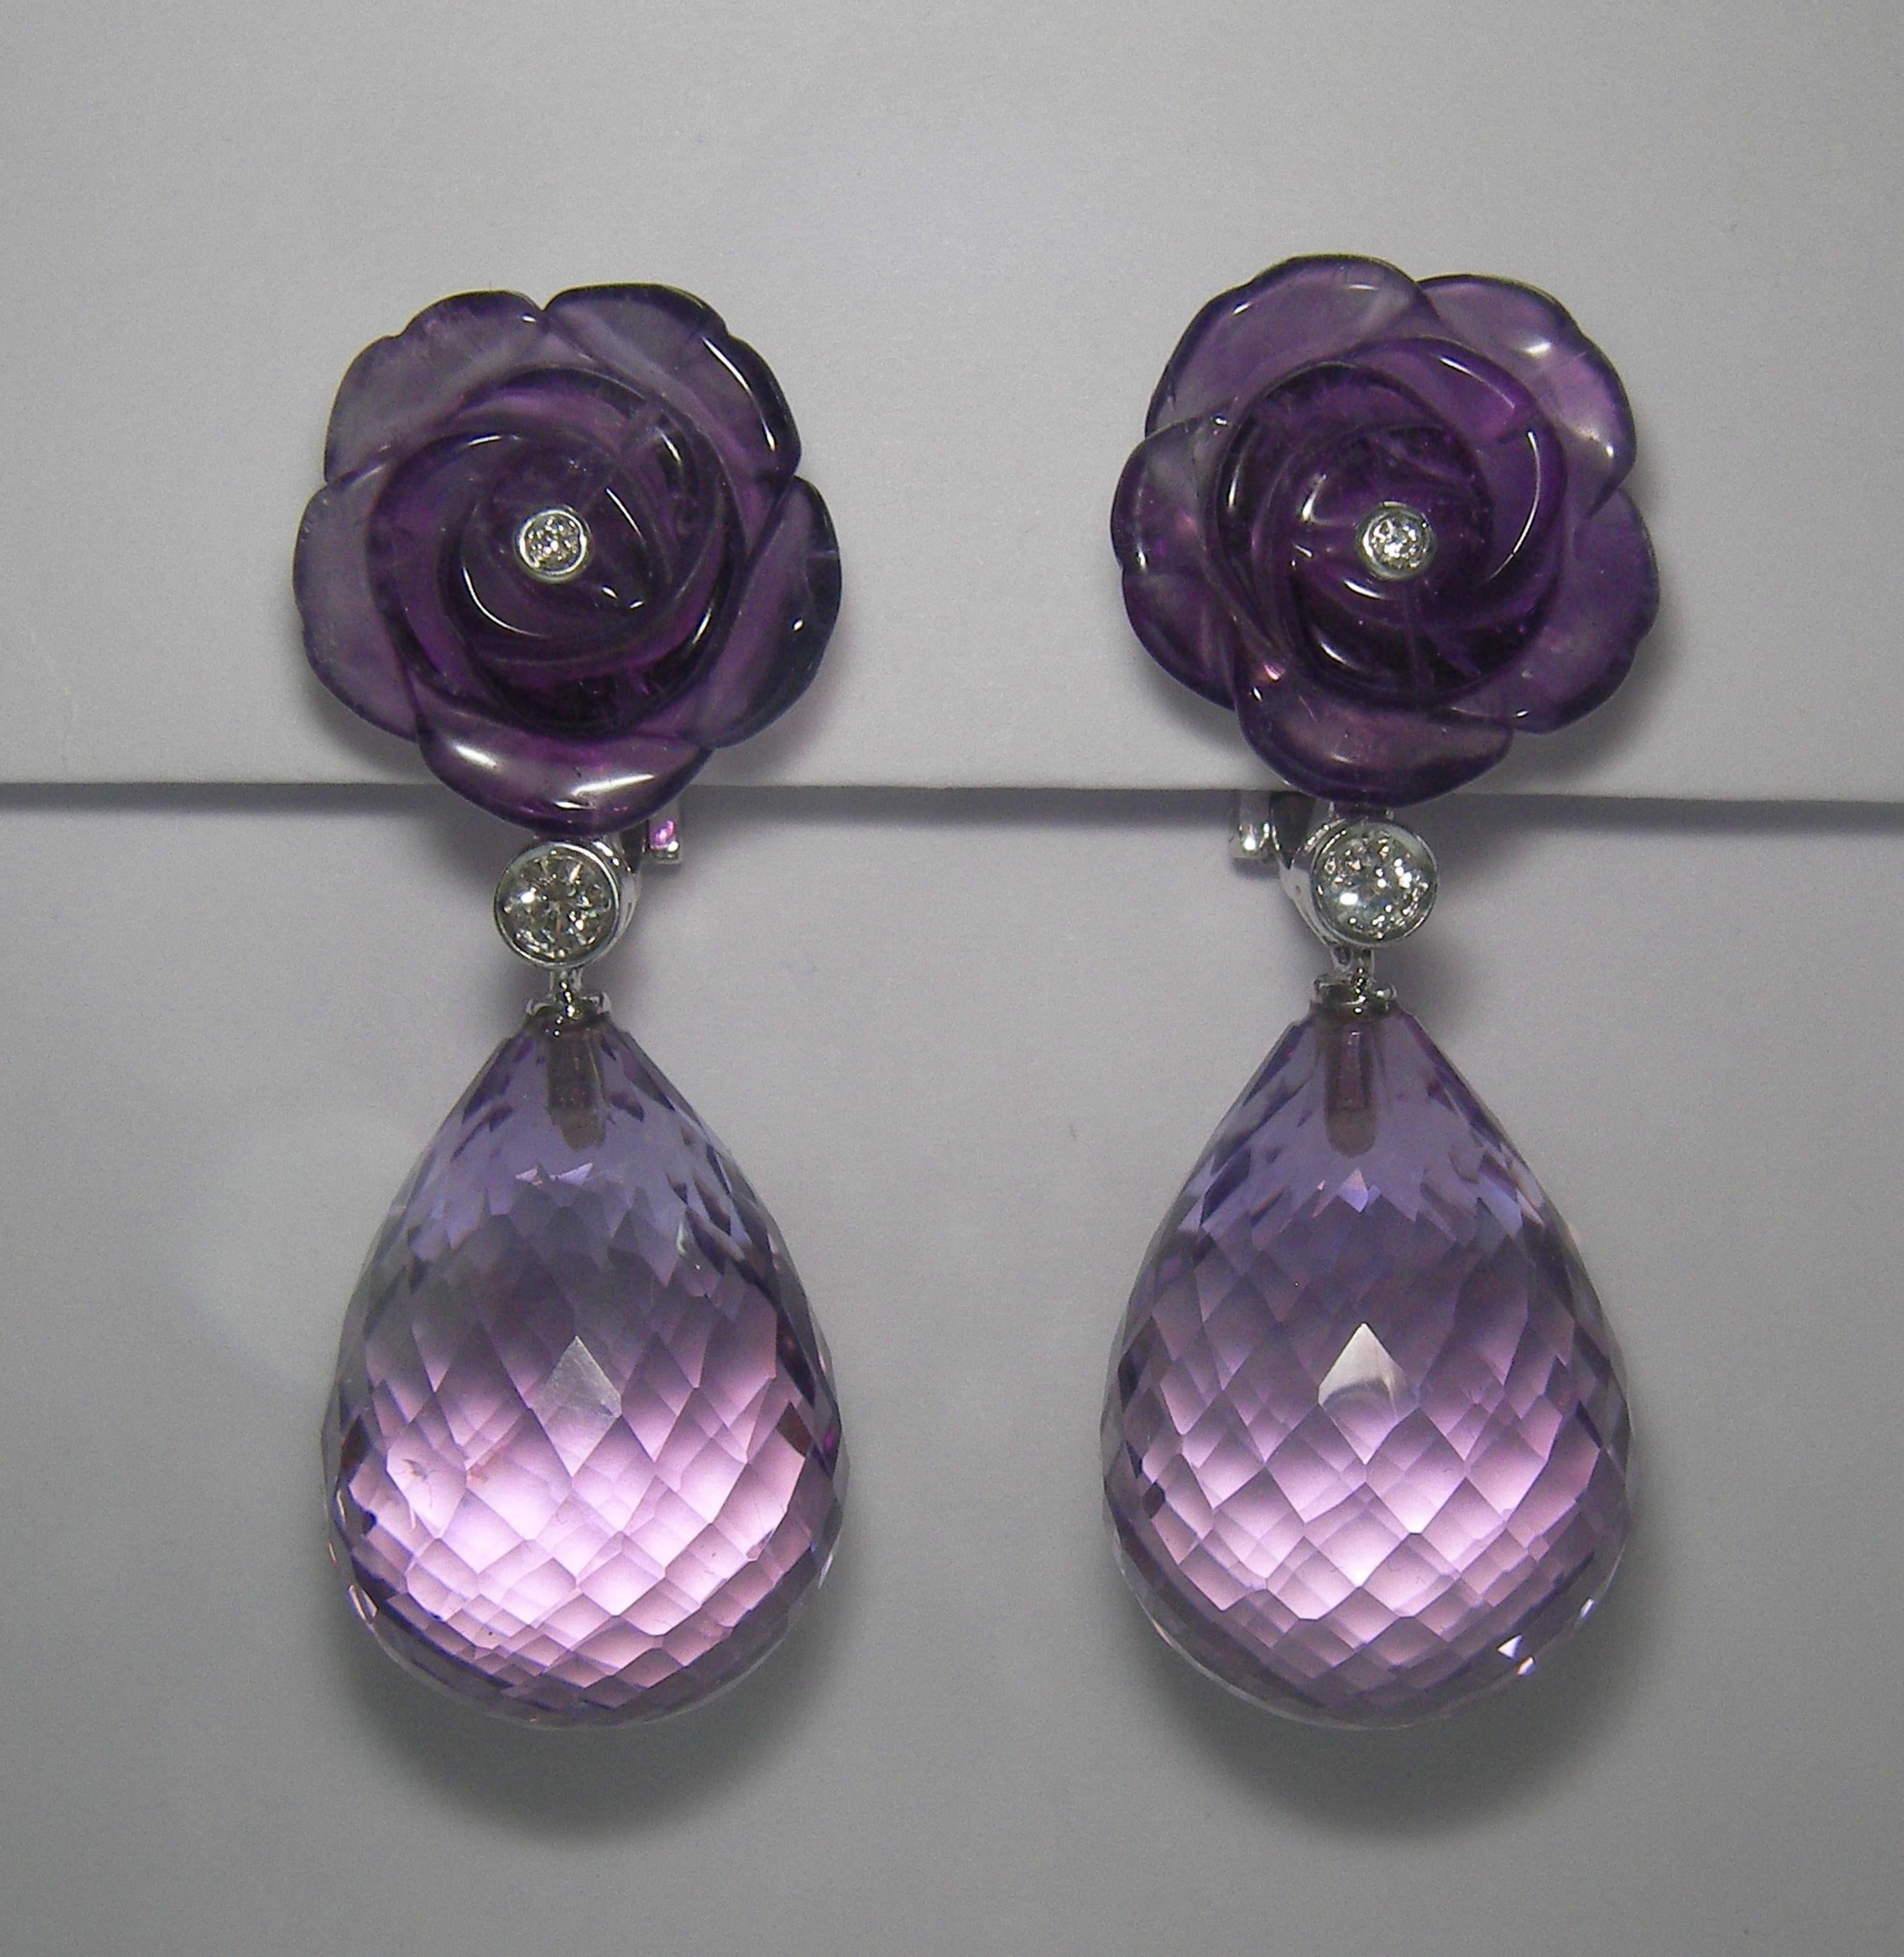 18 Karat White Gold Diamond and Amethyst Dangel Earrings
4 Diamonds 0.15  Carat
2 Amethyst Flower  13,61 Carat
2 Amethyst Briolet 57,04 Carat

Founded in 1974, Gianni Lazzaro is a family-owned jewelery company based out of Düsseldorf,